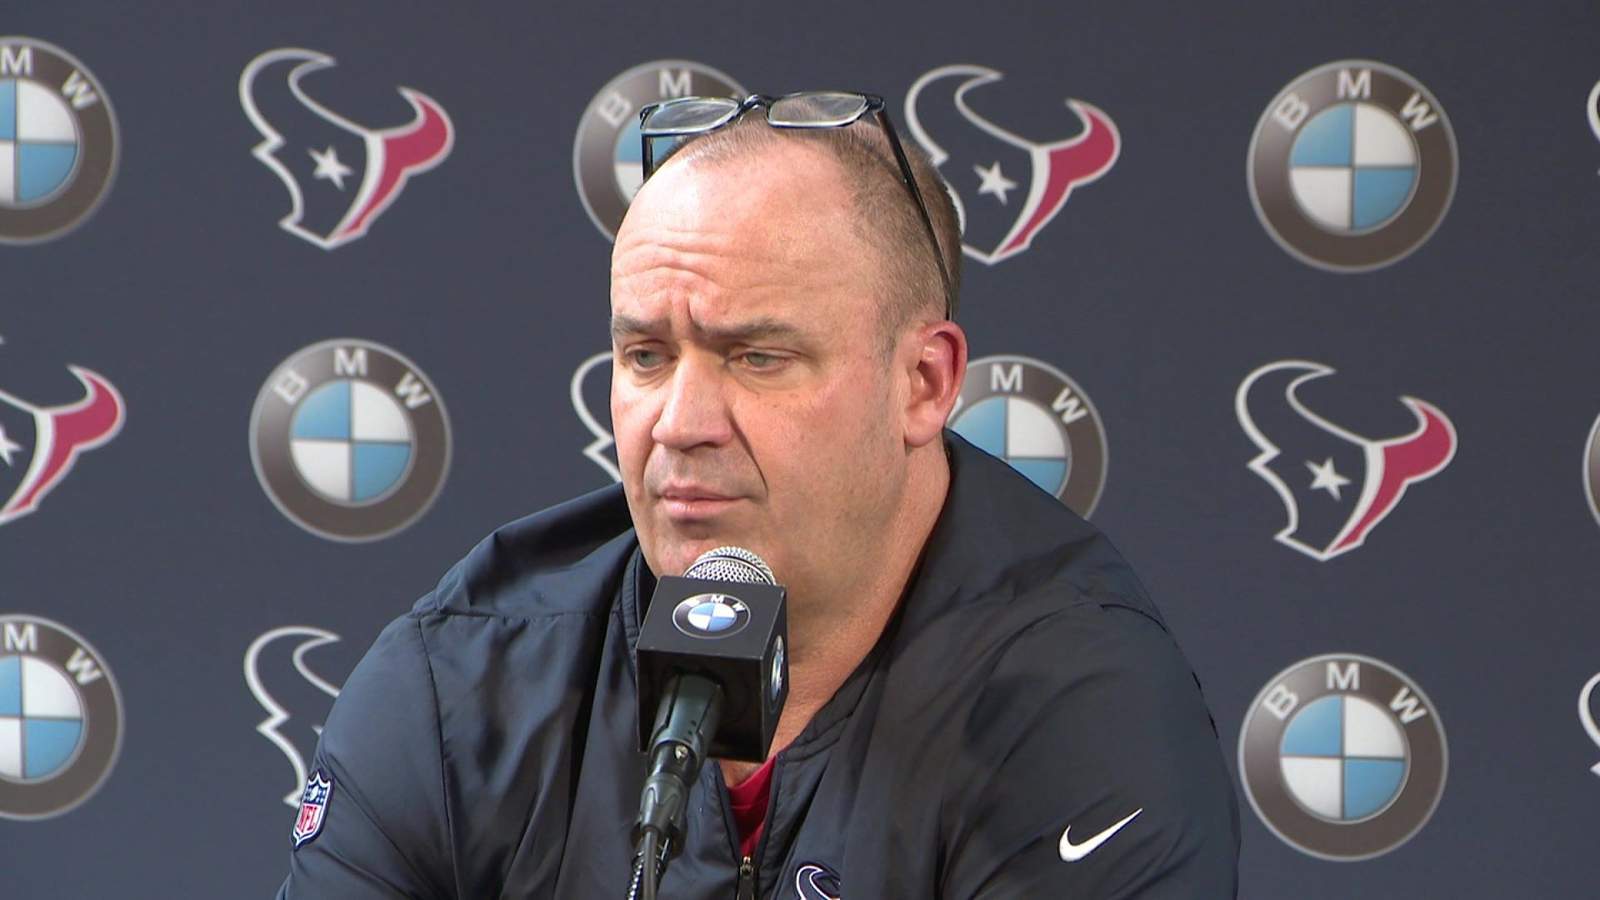 This is what Texans head coach Bill O’Brien had to say about the death of George Floyd